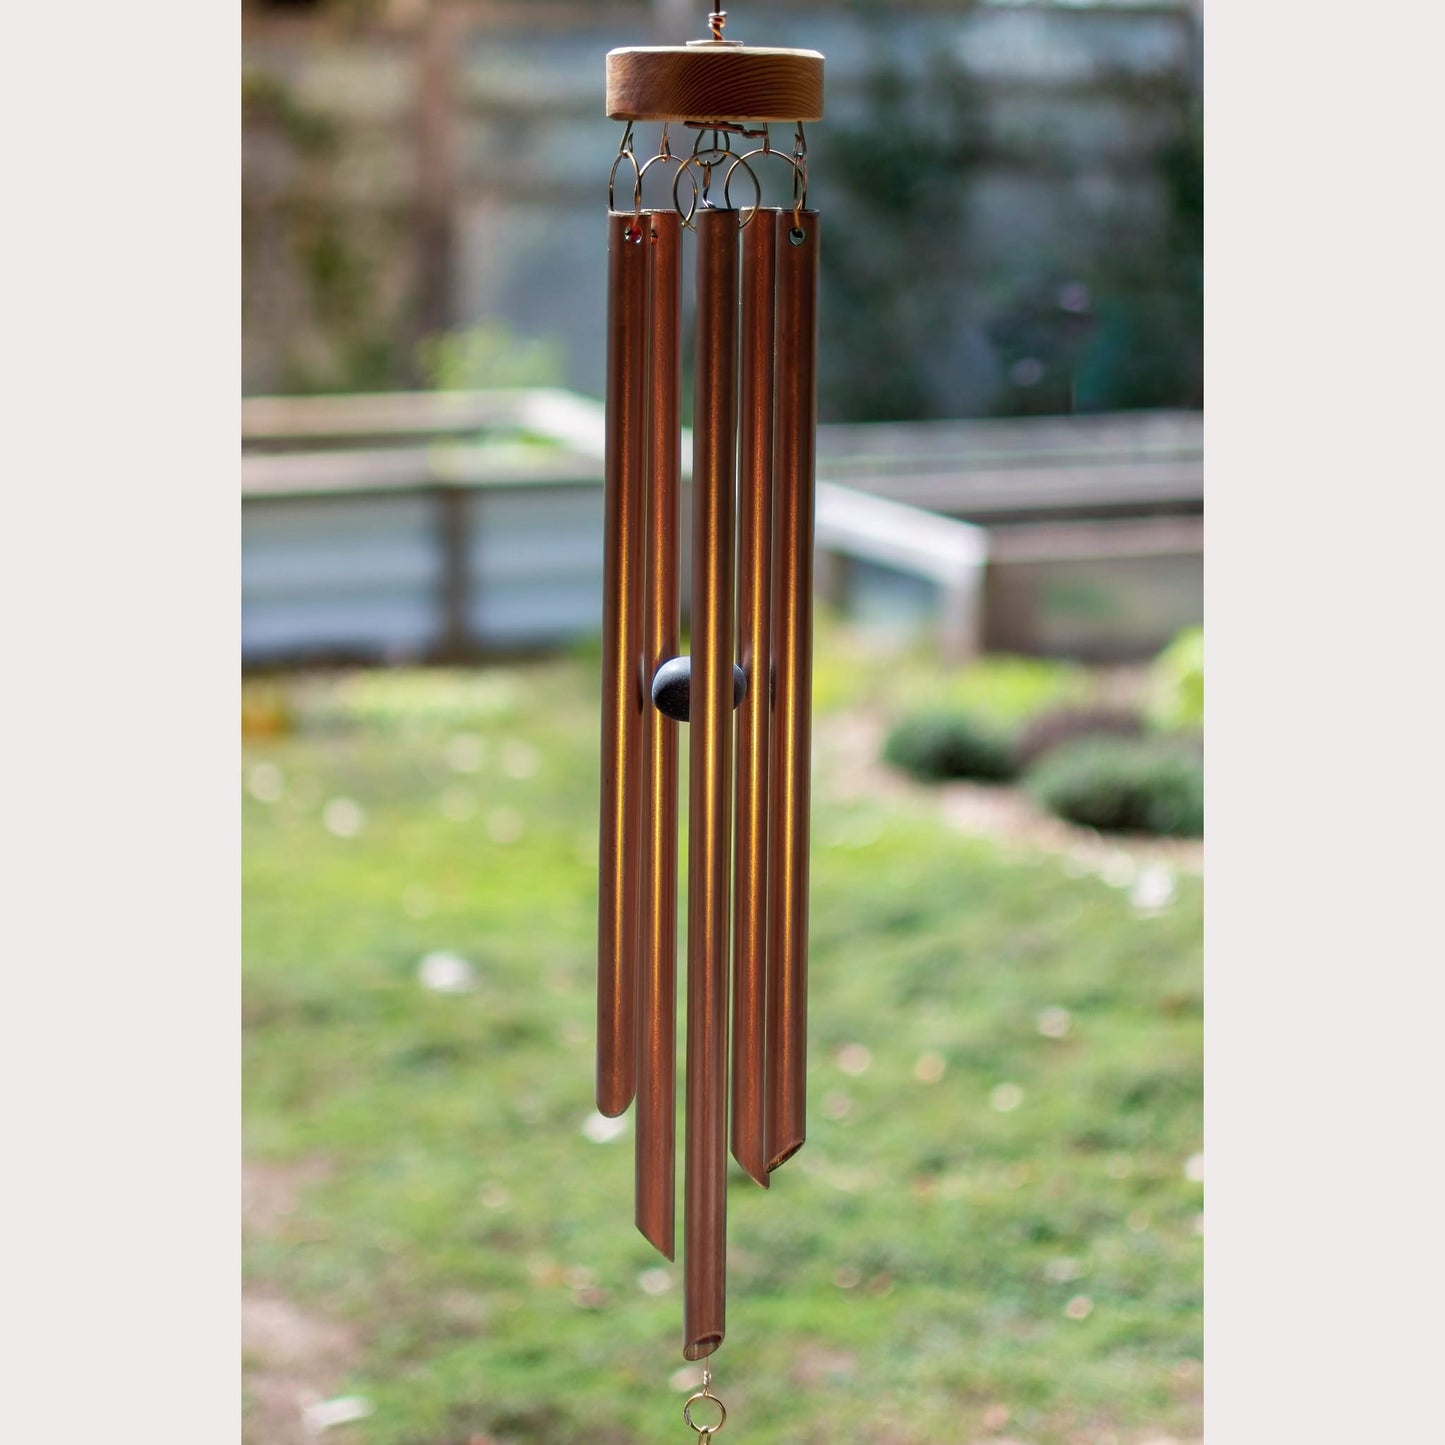 detail copper wind chime five chimes